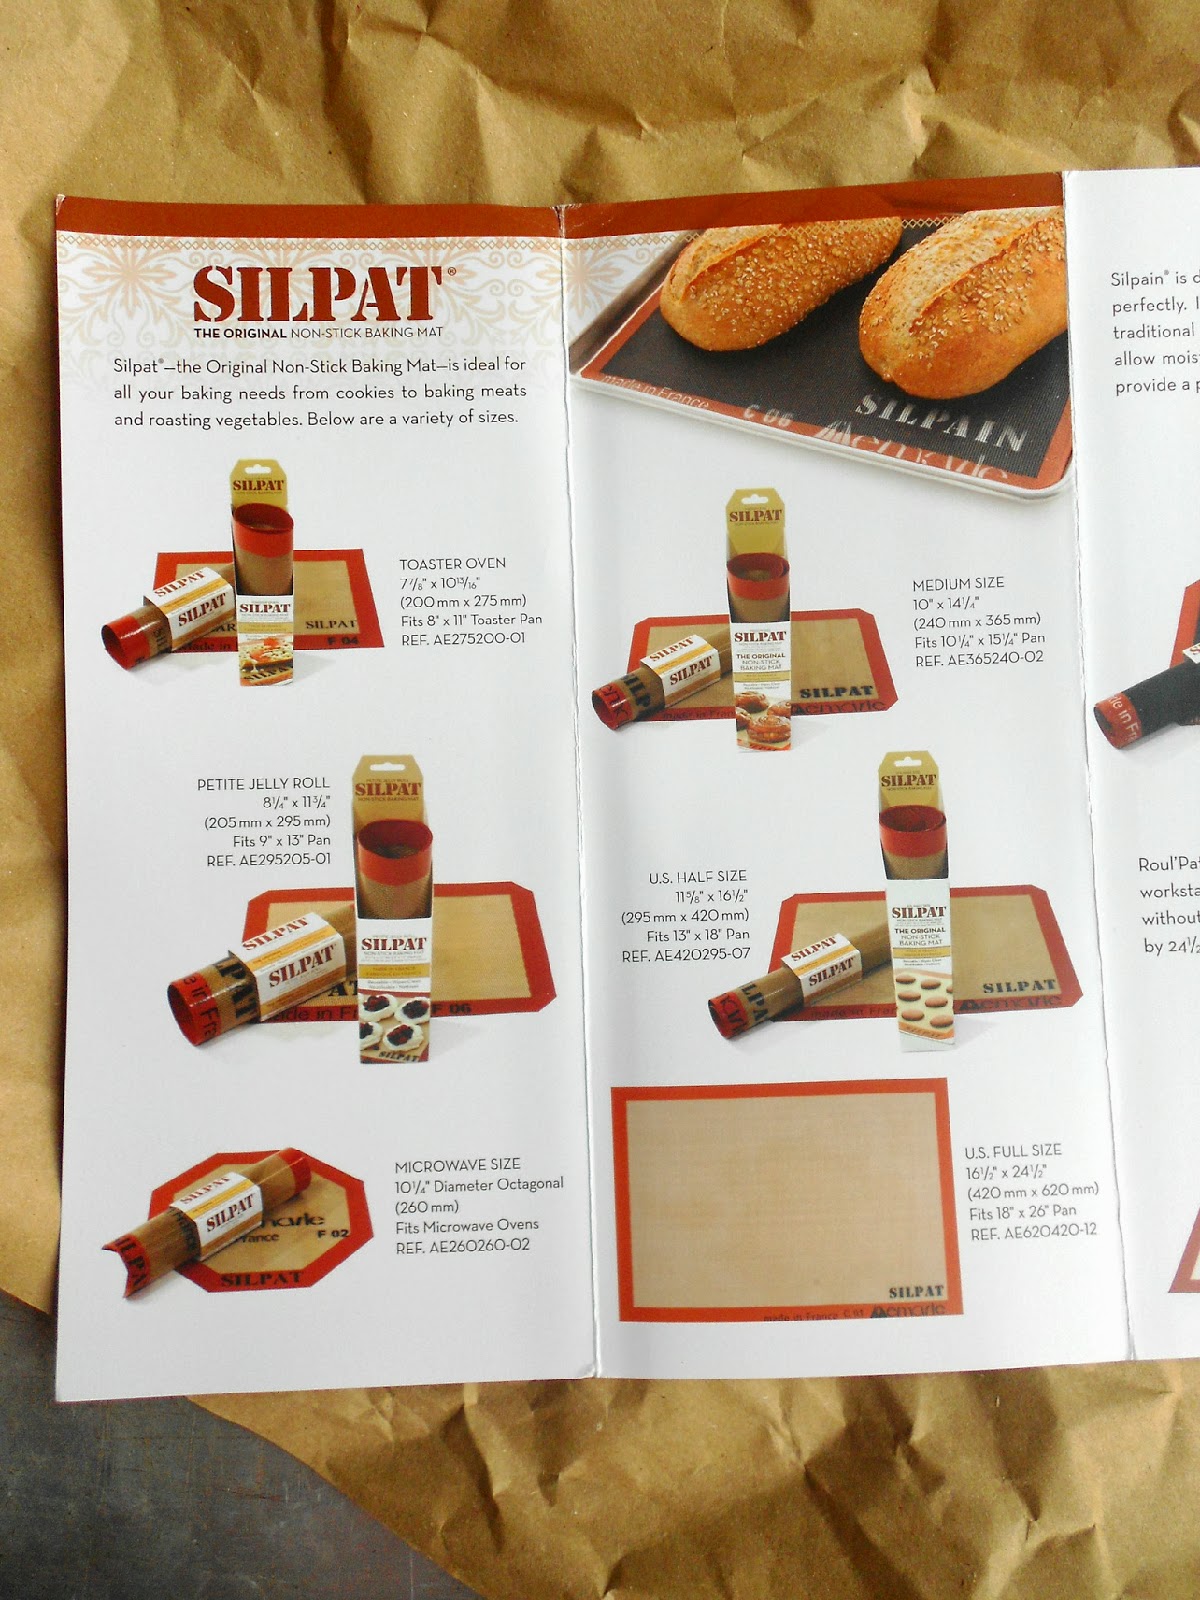 Review: Silpat's New Line of Non-Stick Bakeware Works Wonderfully